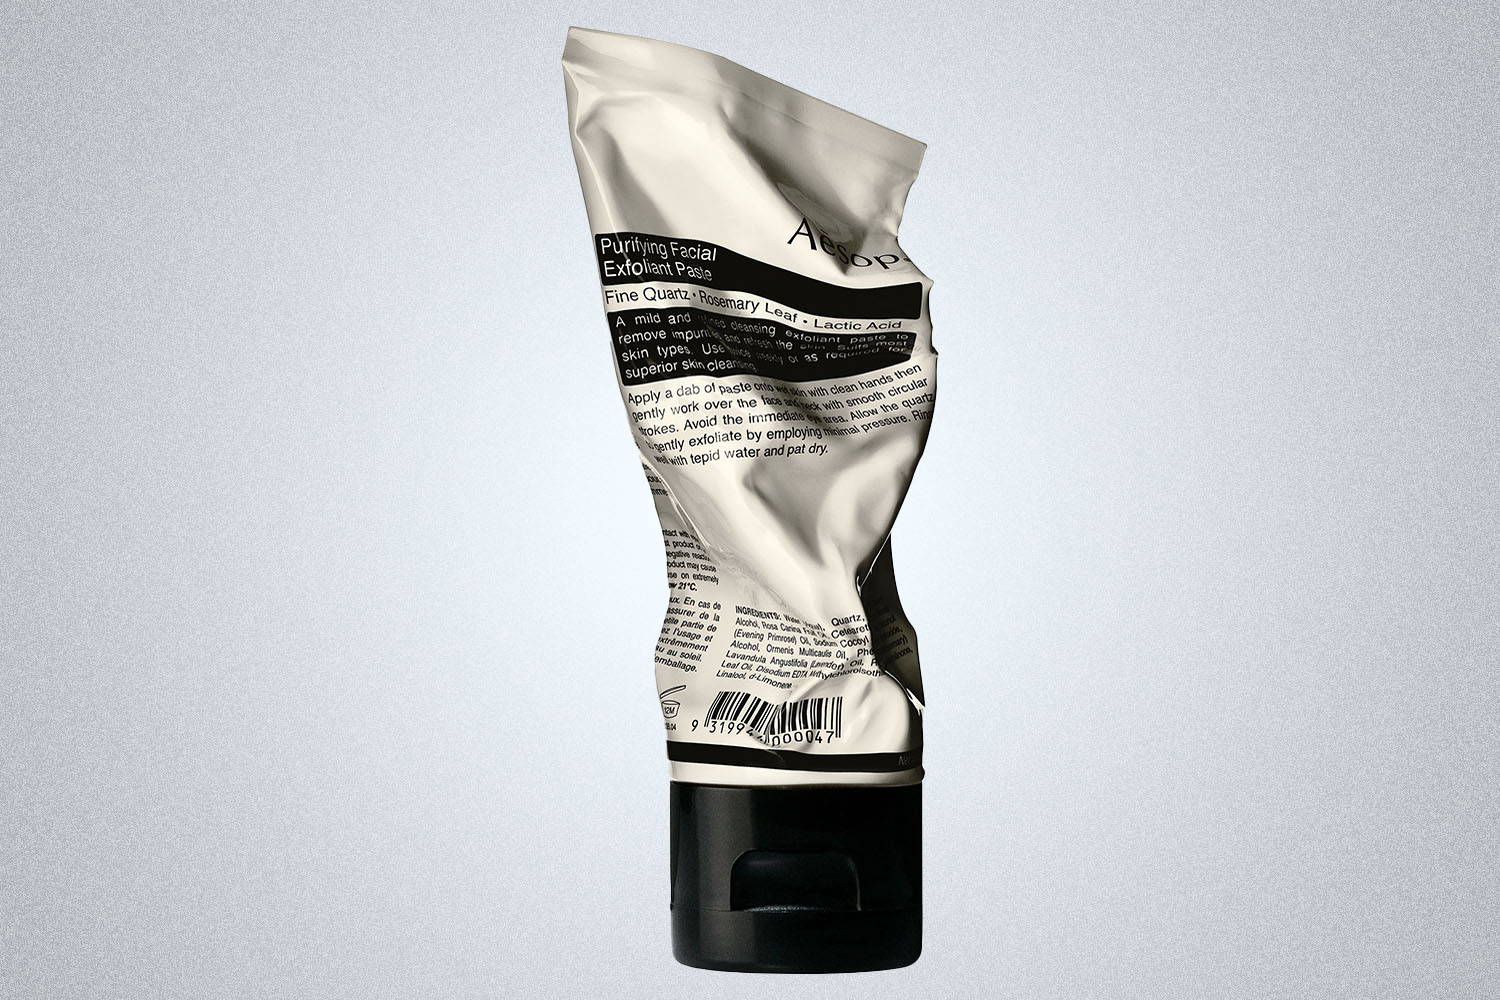 a Aesop skincare product on a grey background